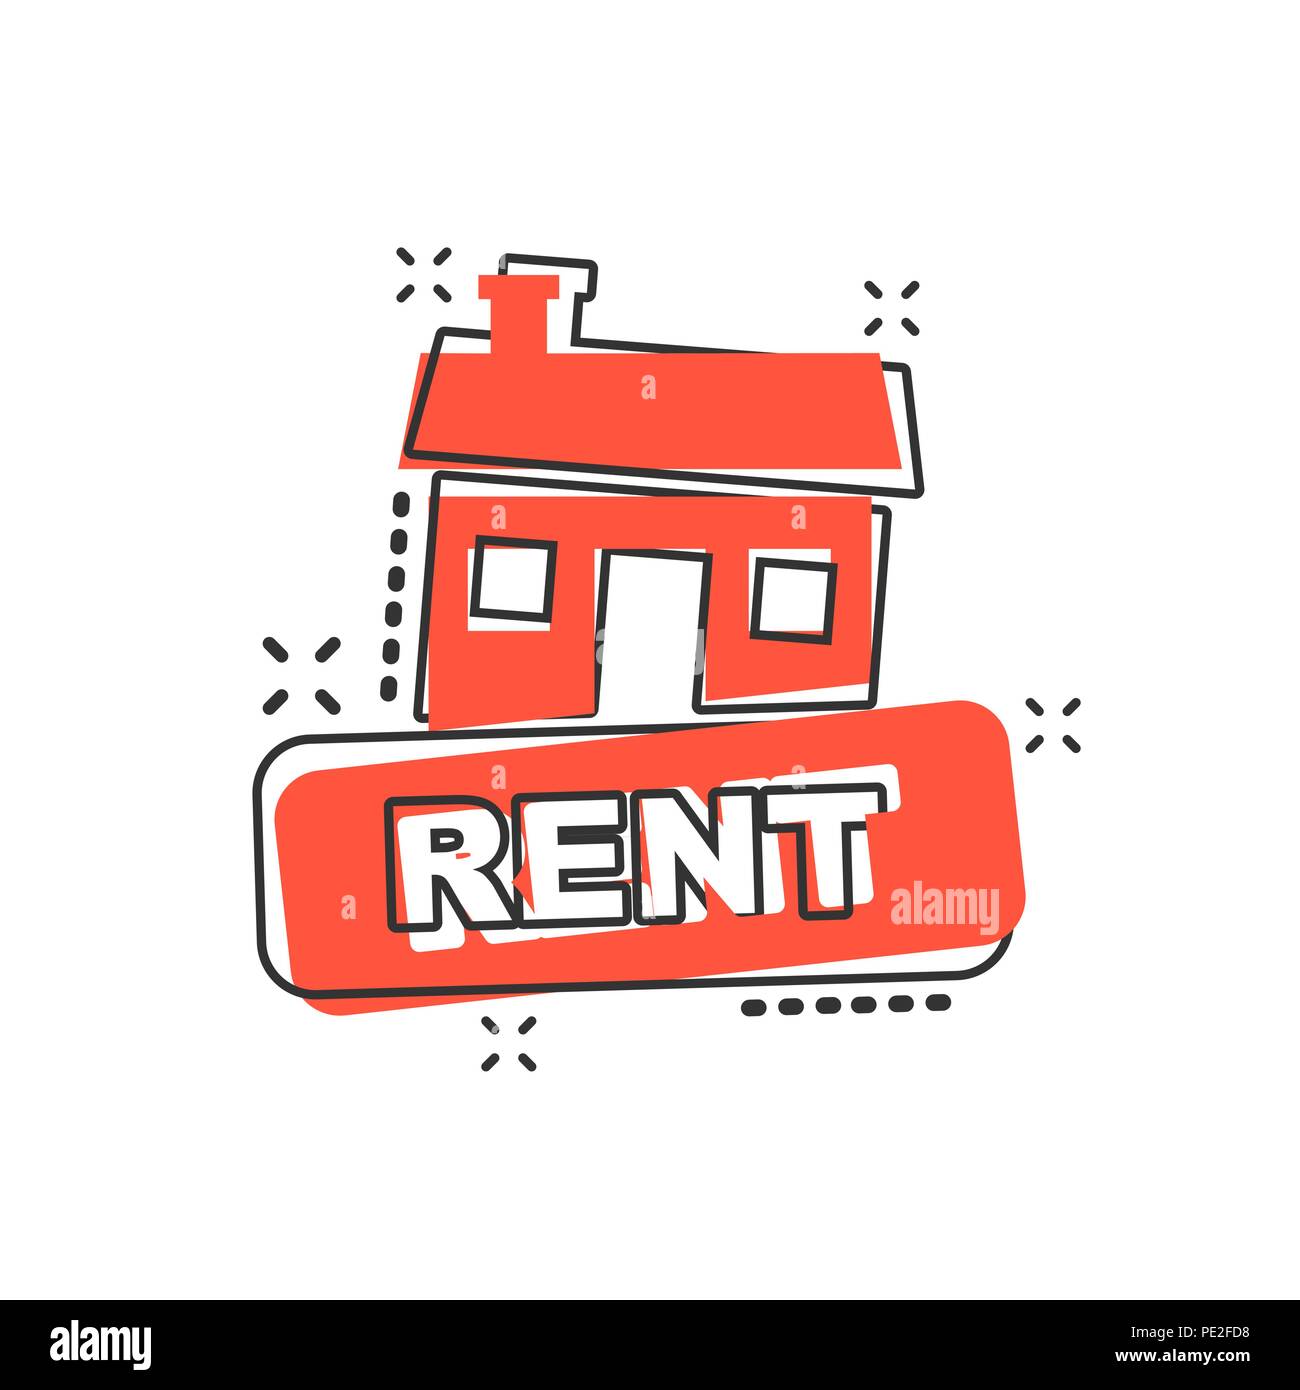 Vector cartoon rent house icon in comic style. Rent sign illustration pictogram. Rental business splash effect concept. Stock Vector